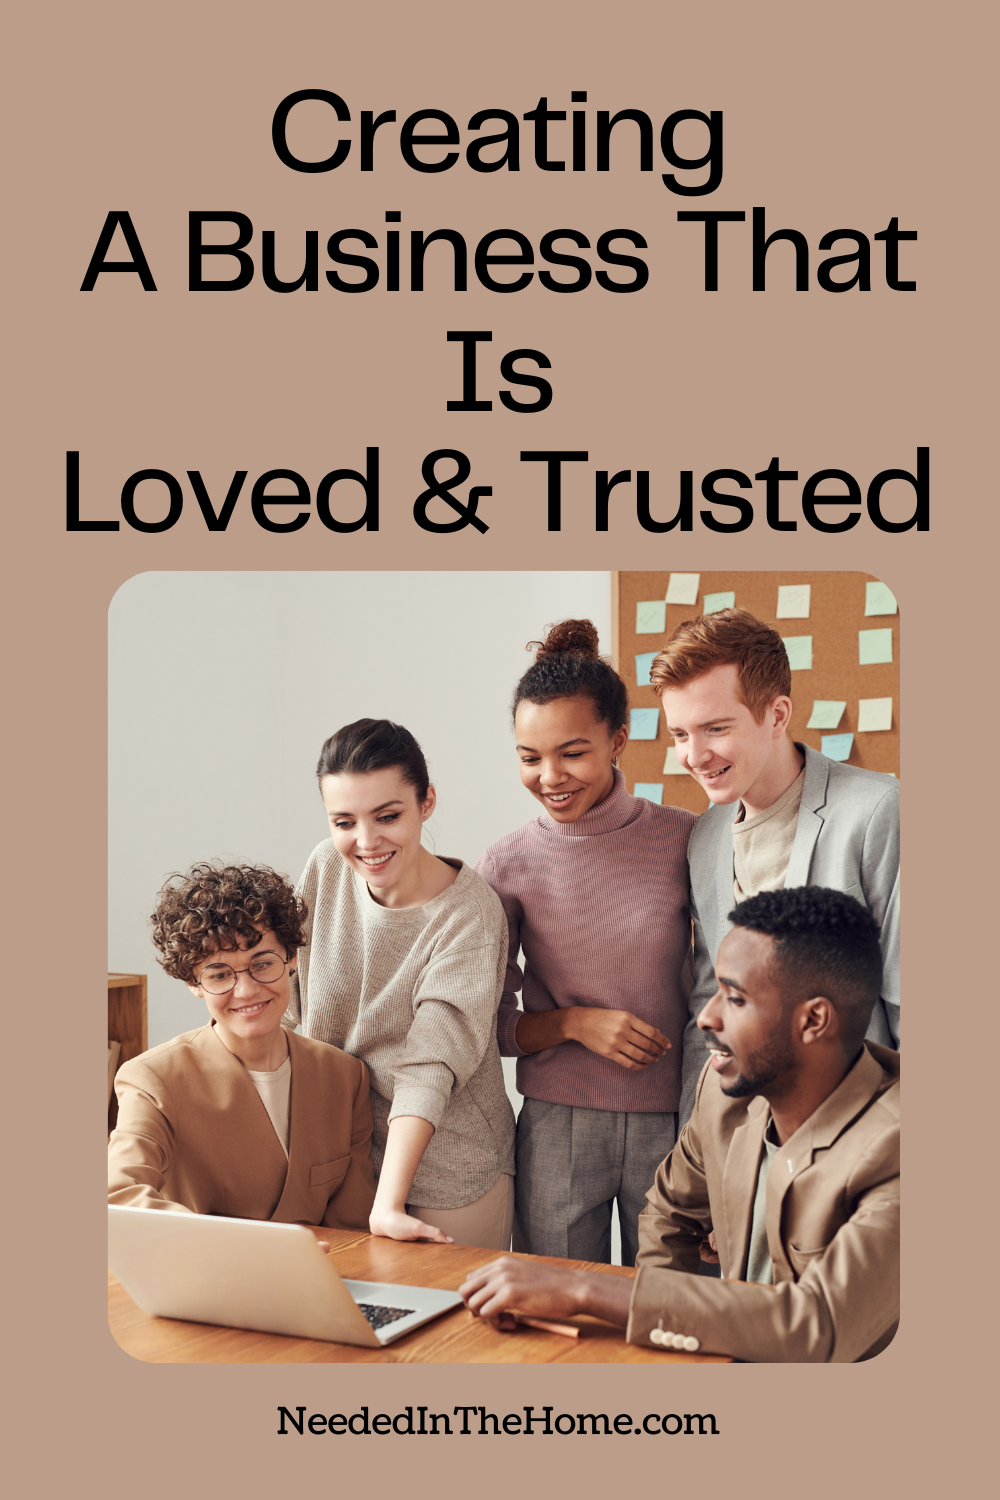 pinterest pin description creating a business that is loved and trusted team of five business people making decisions looking at laptop smiling